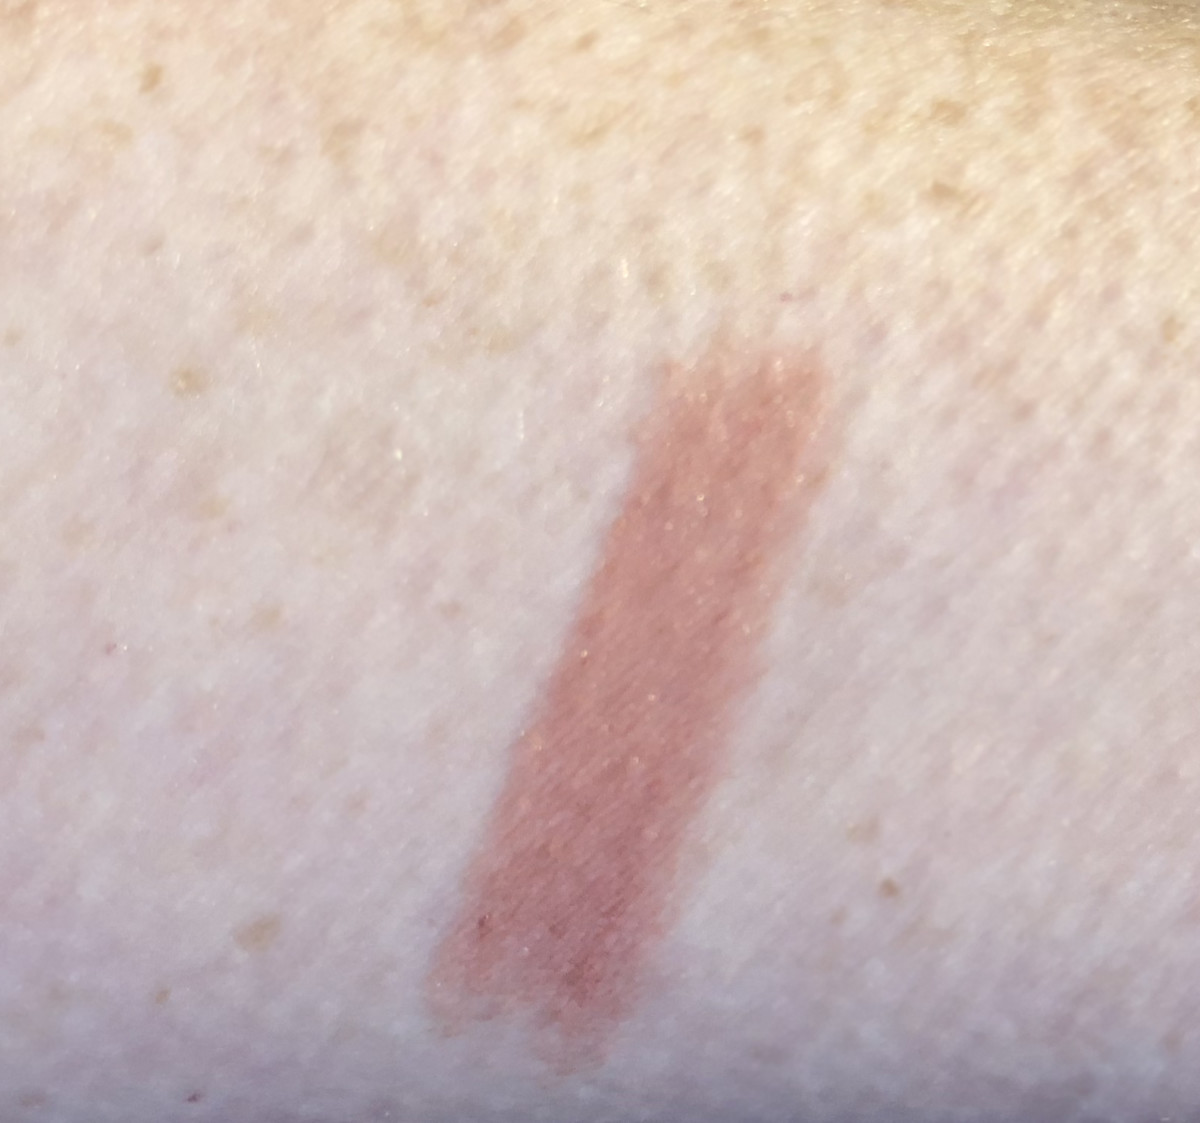 Pillow Talk Swatch - shot in mid winter, hence the goose pimples!